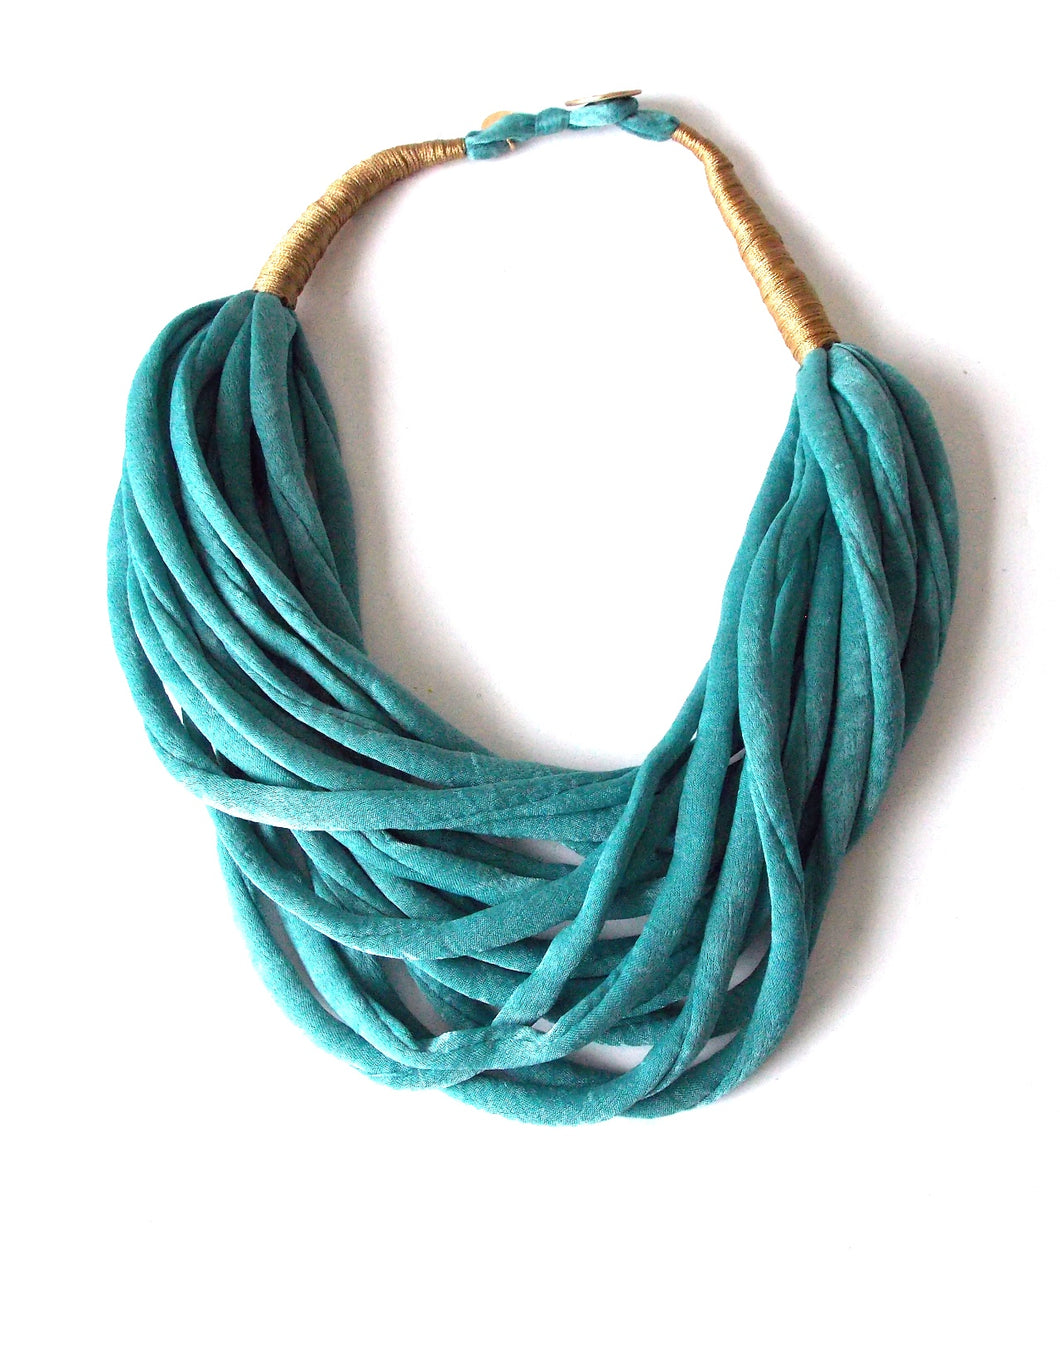 Teal Blue Layered Fabric Necklace